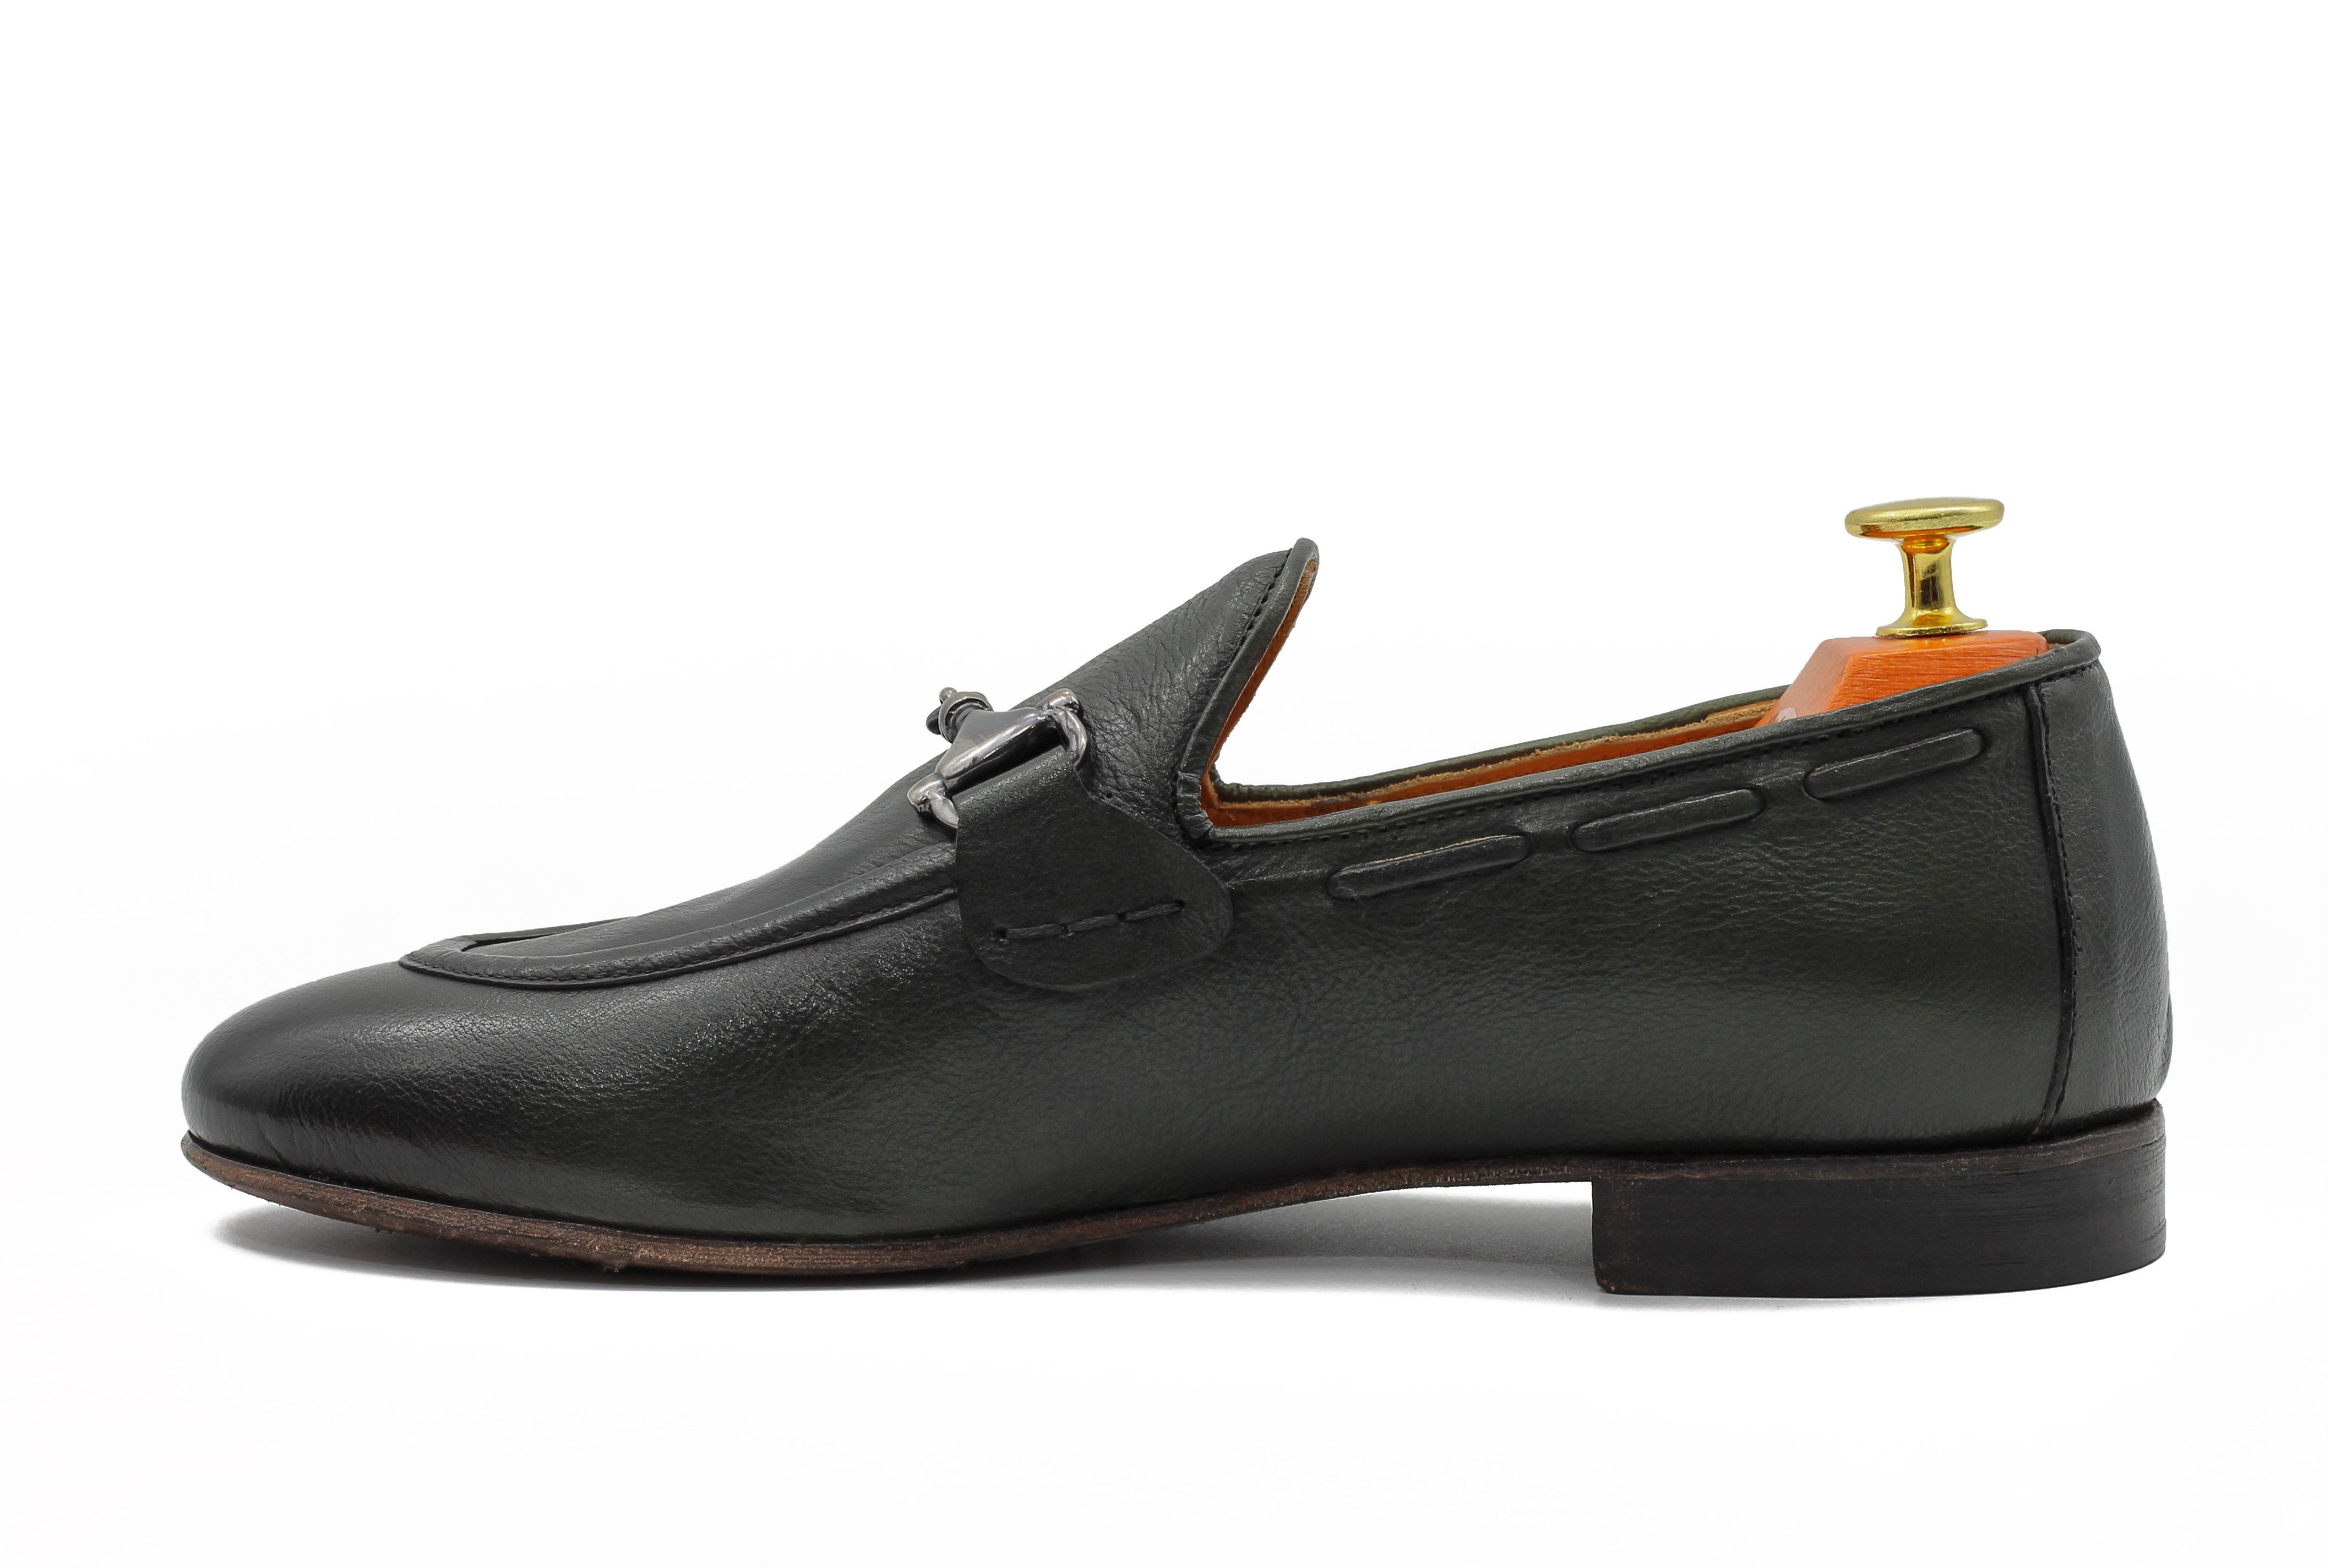 NAPLES 02 - ITALIAN LEATHER SNAFFLE BIT LOAFER IN GREEN